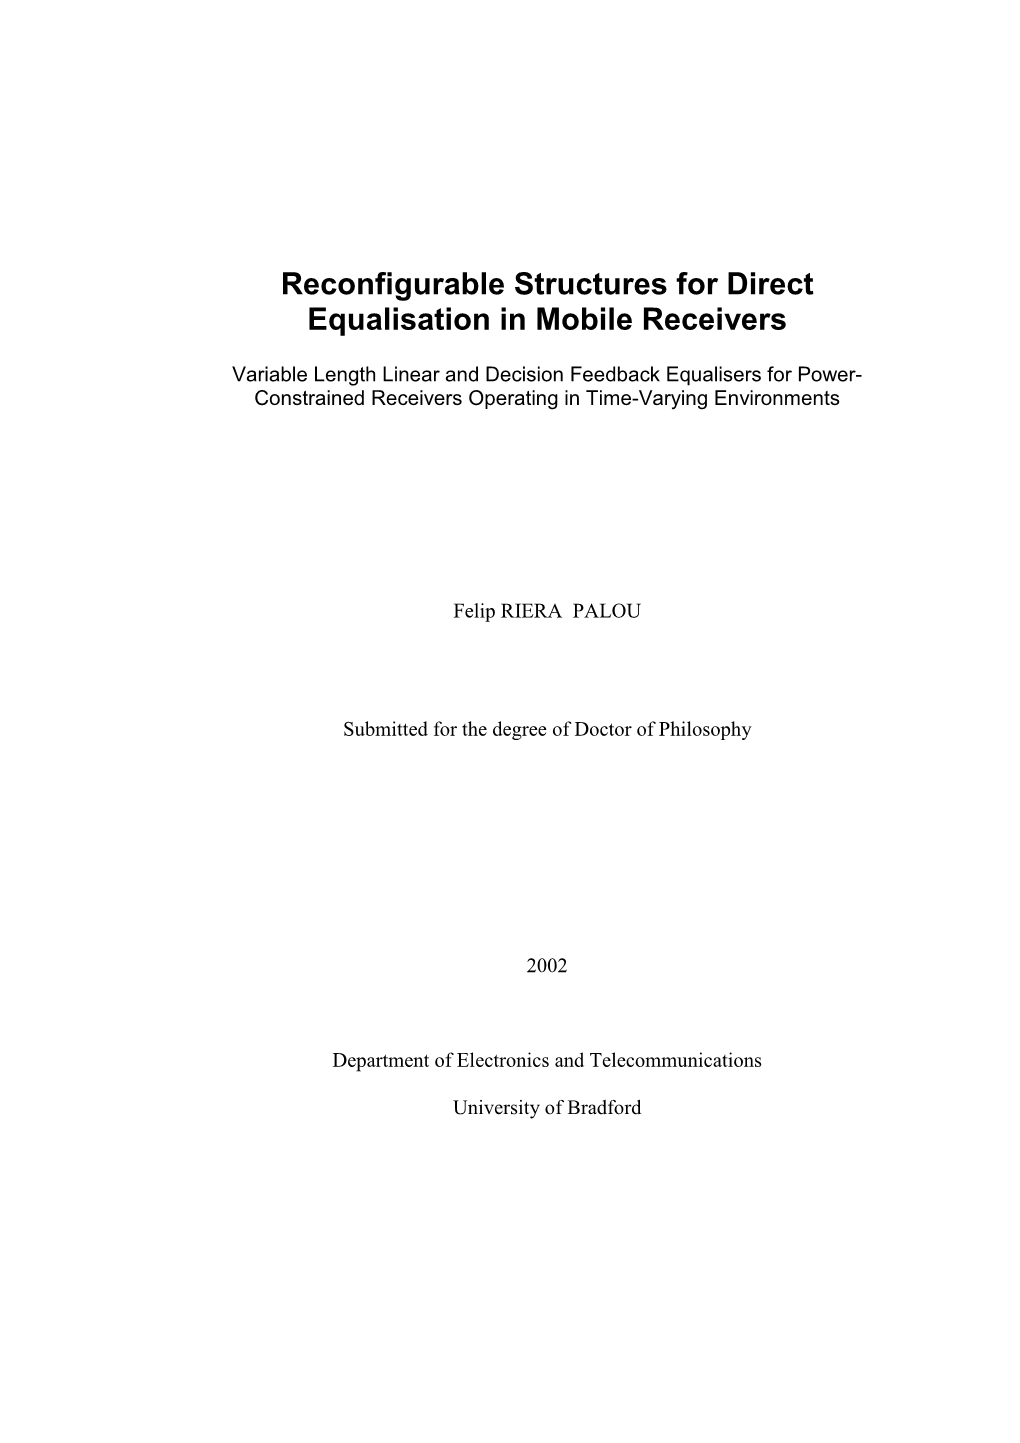 Reconfigurable Structures for Direct Equalisation in Mobile Receivers